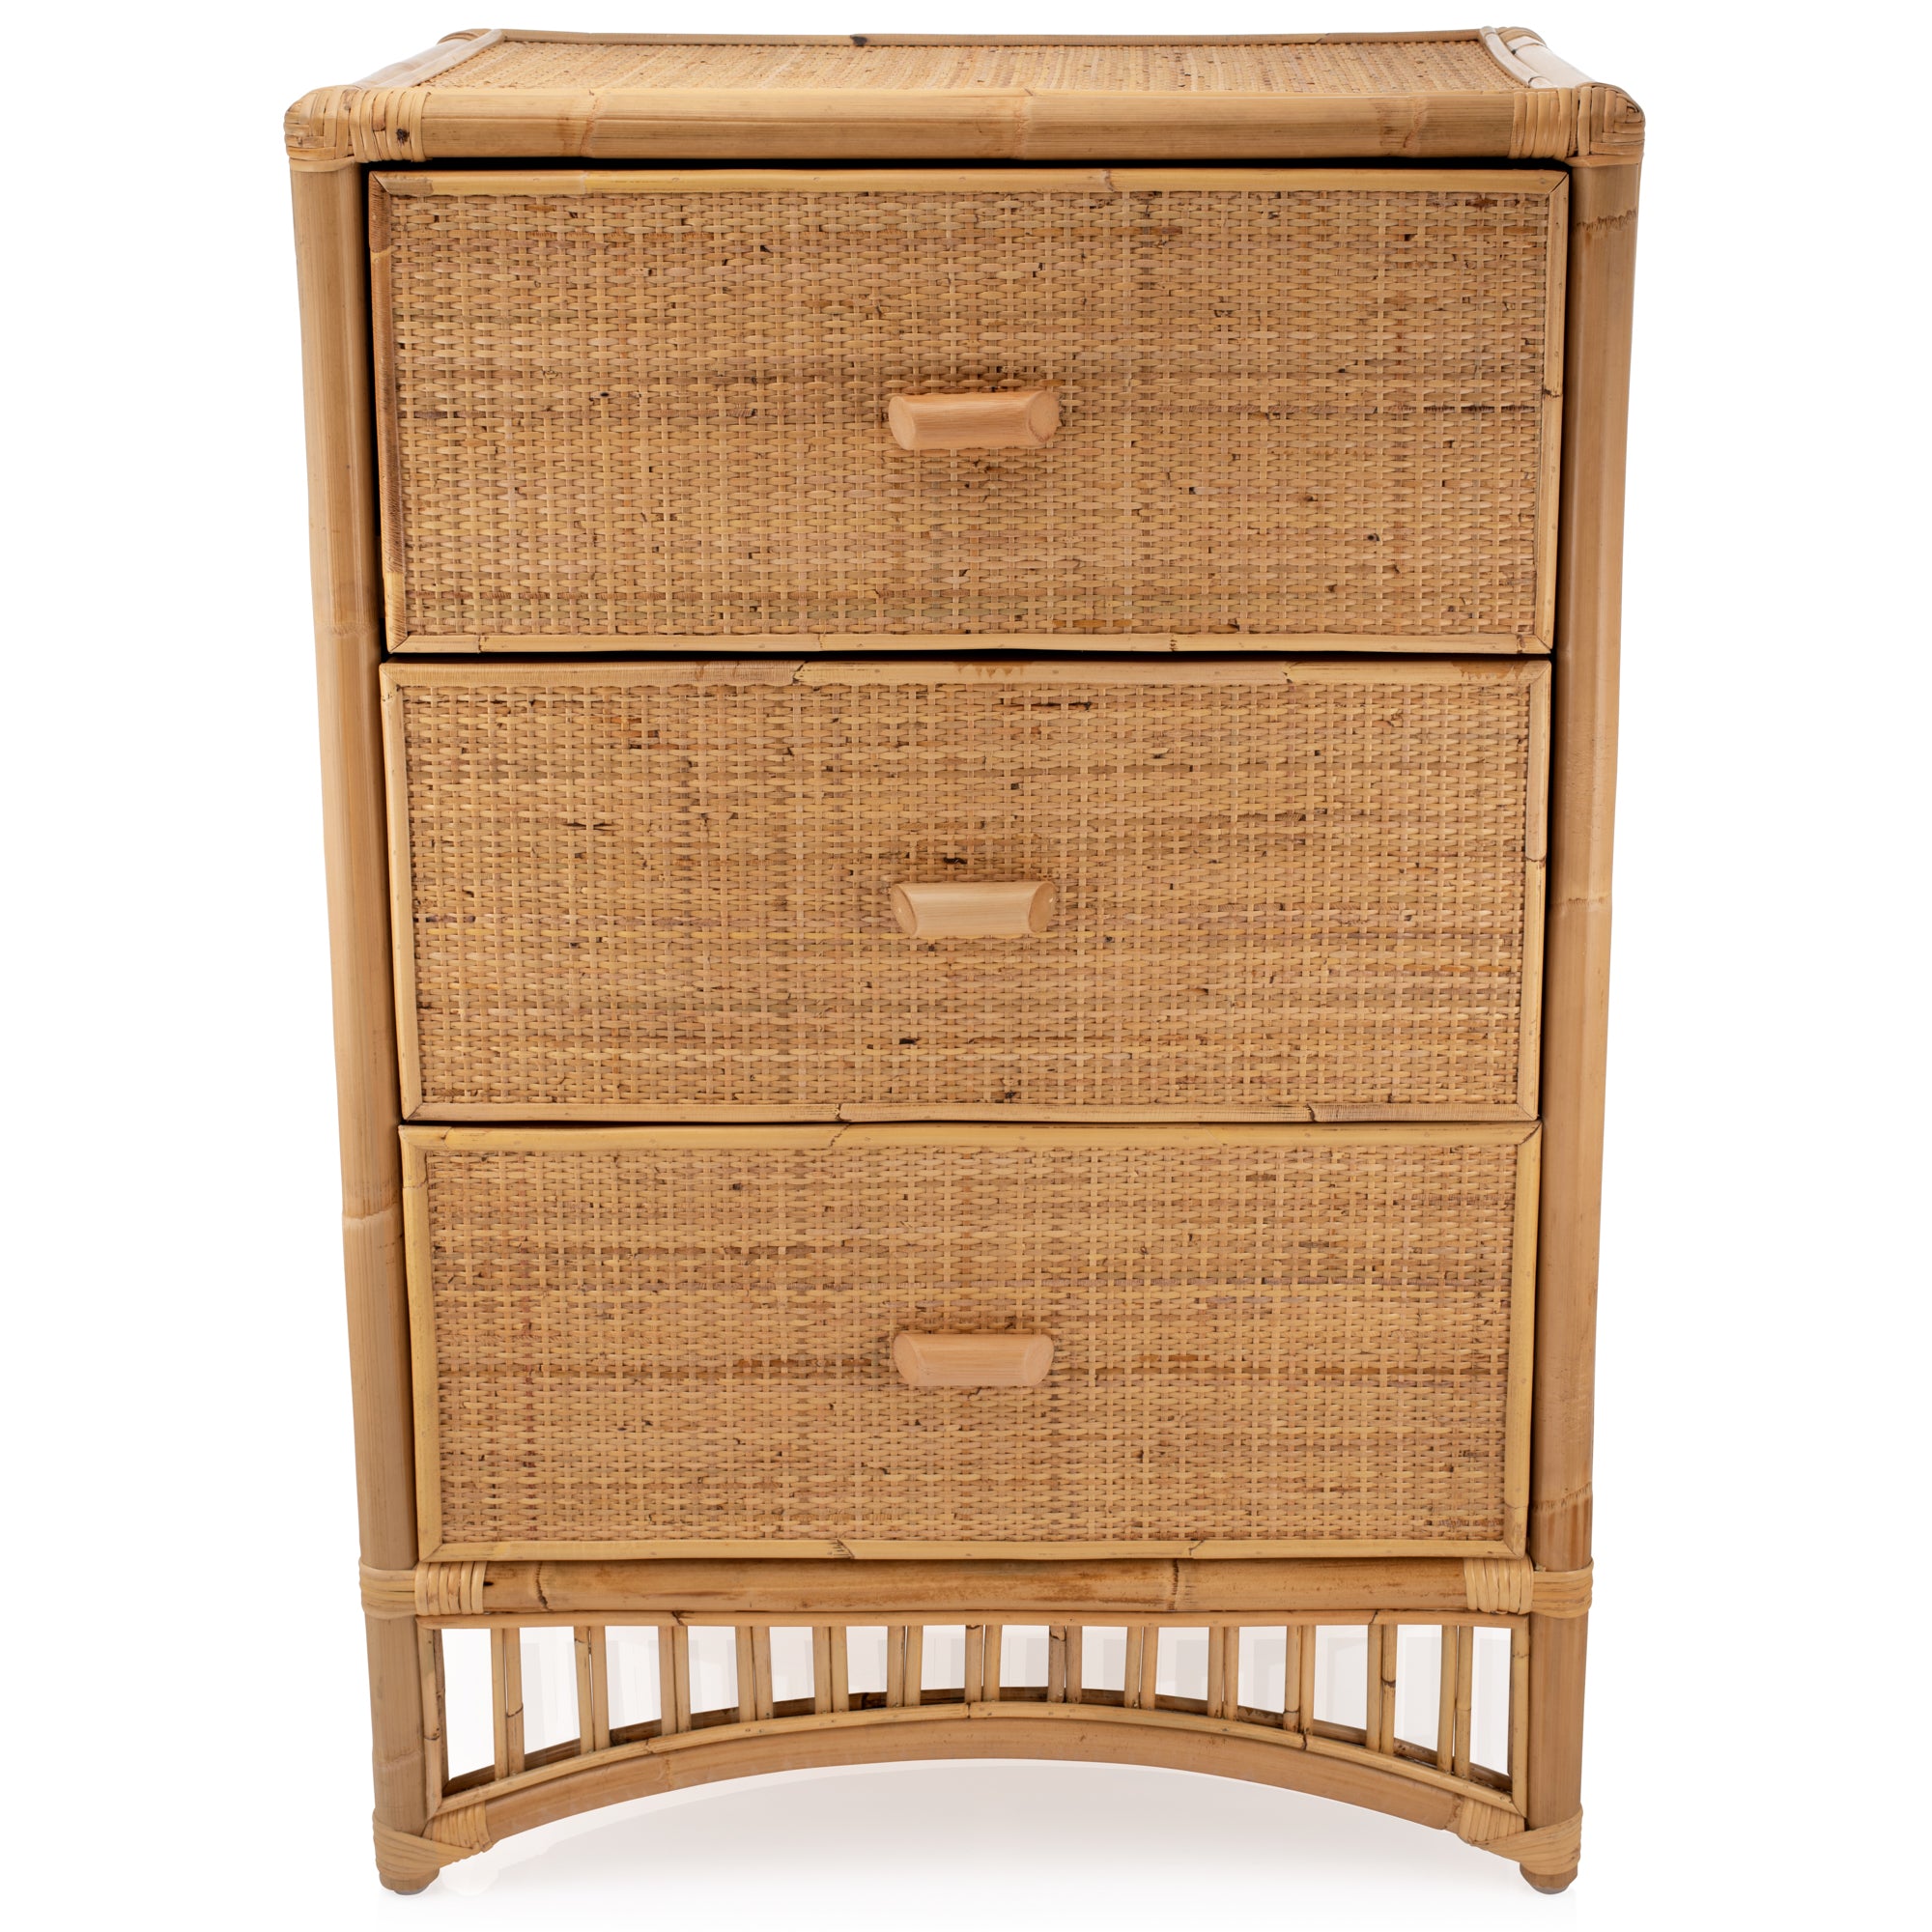 Iris Natural Rattan and Wicker Chest of 3 drawers - The Rattan Company